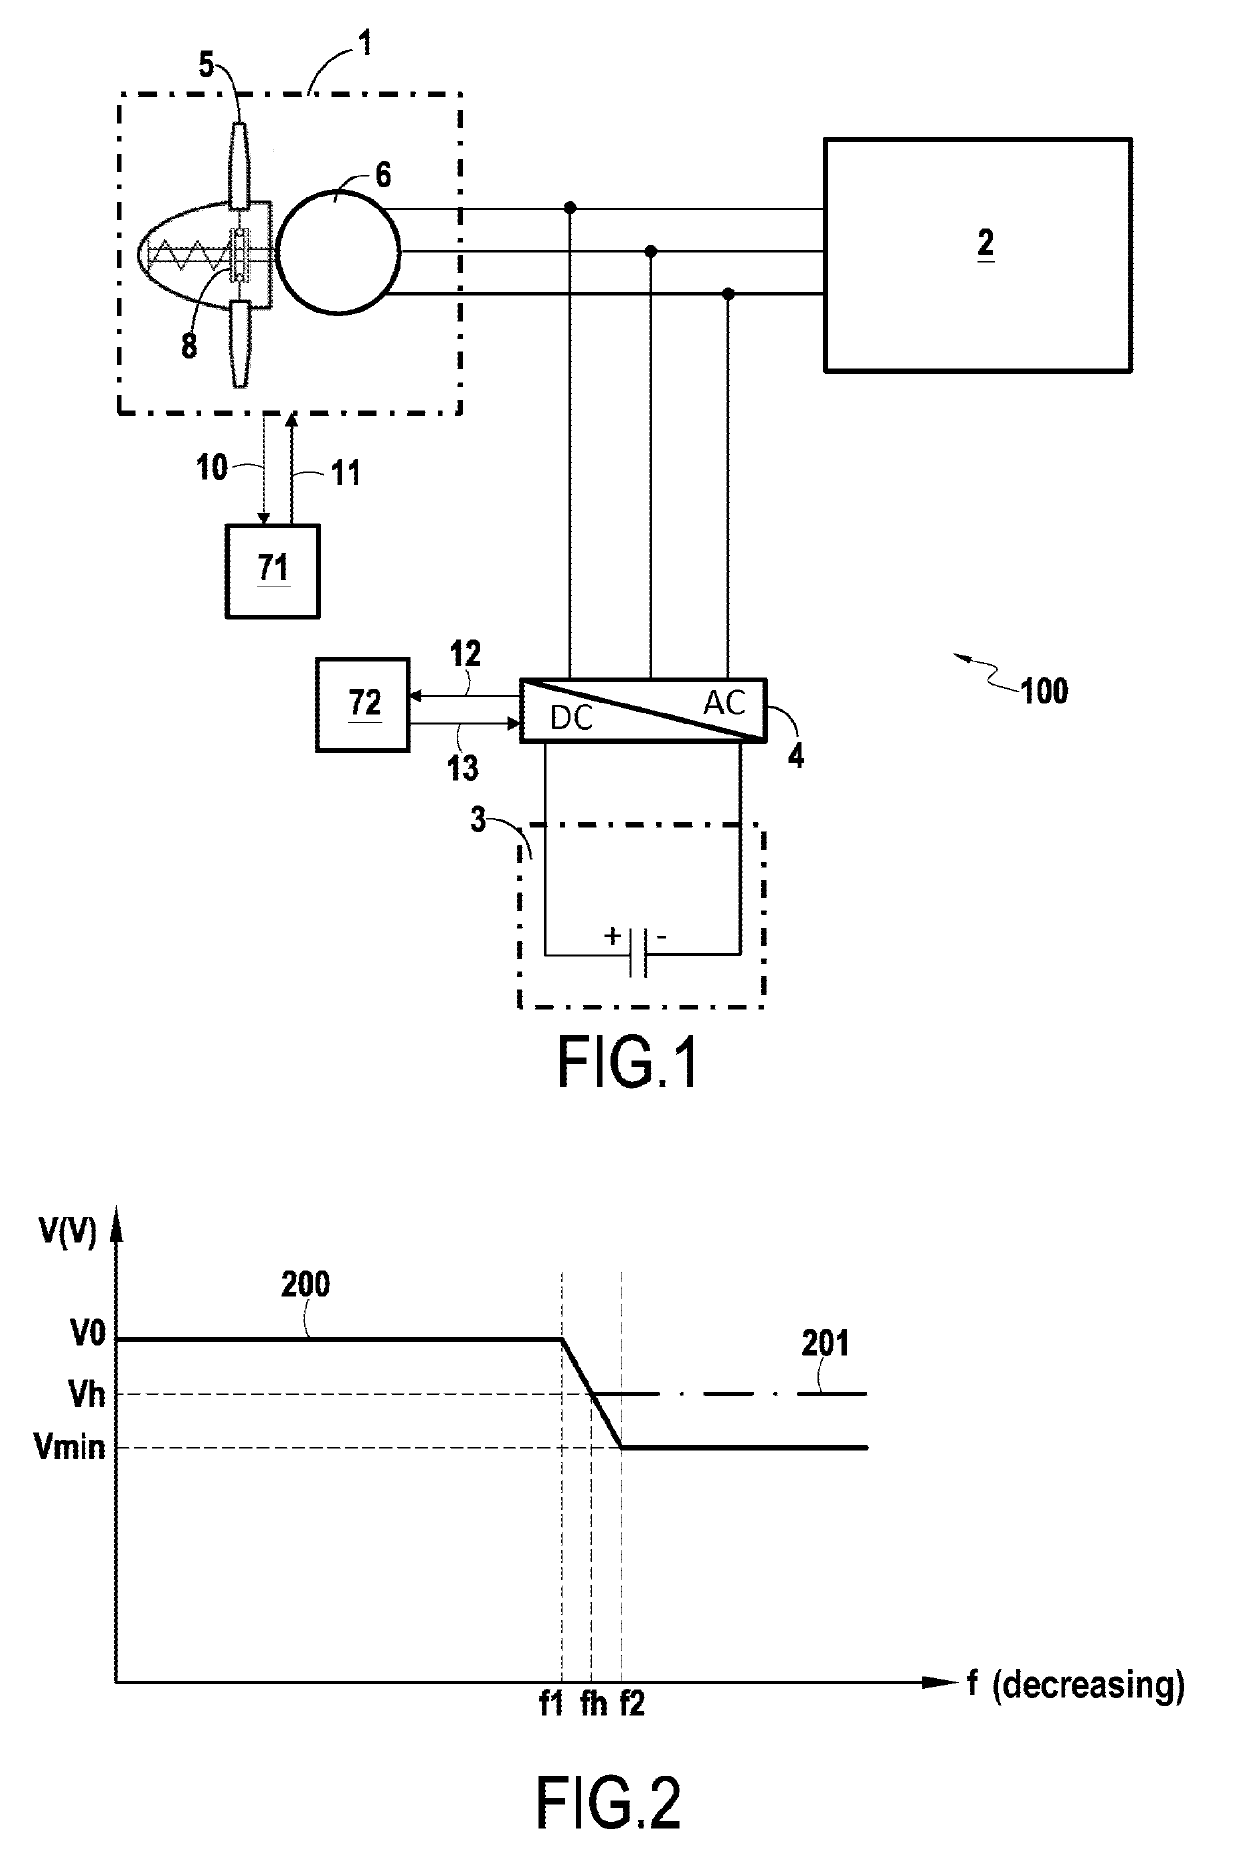 A method and a system for powering an electrical load in an aircraft